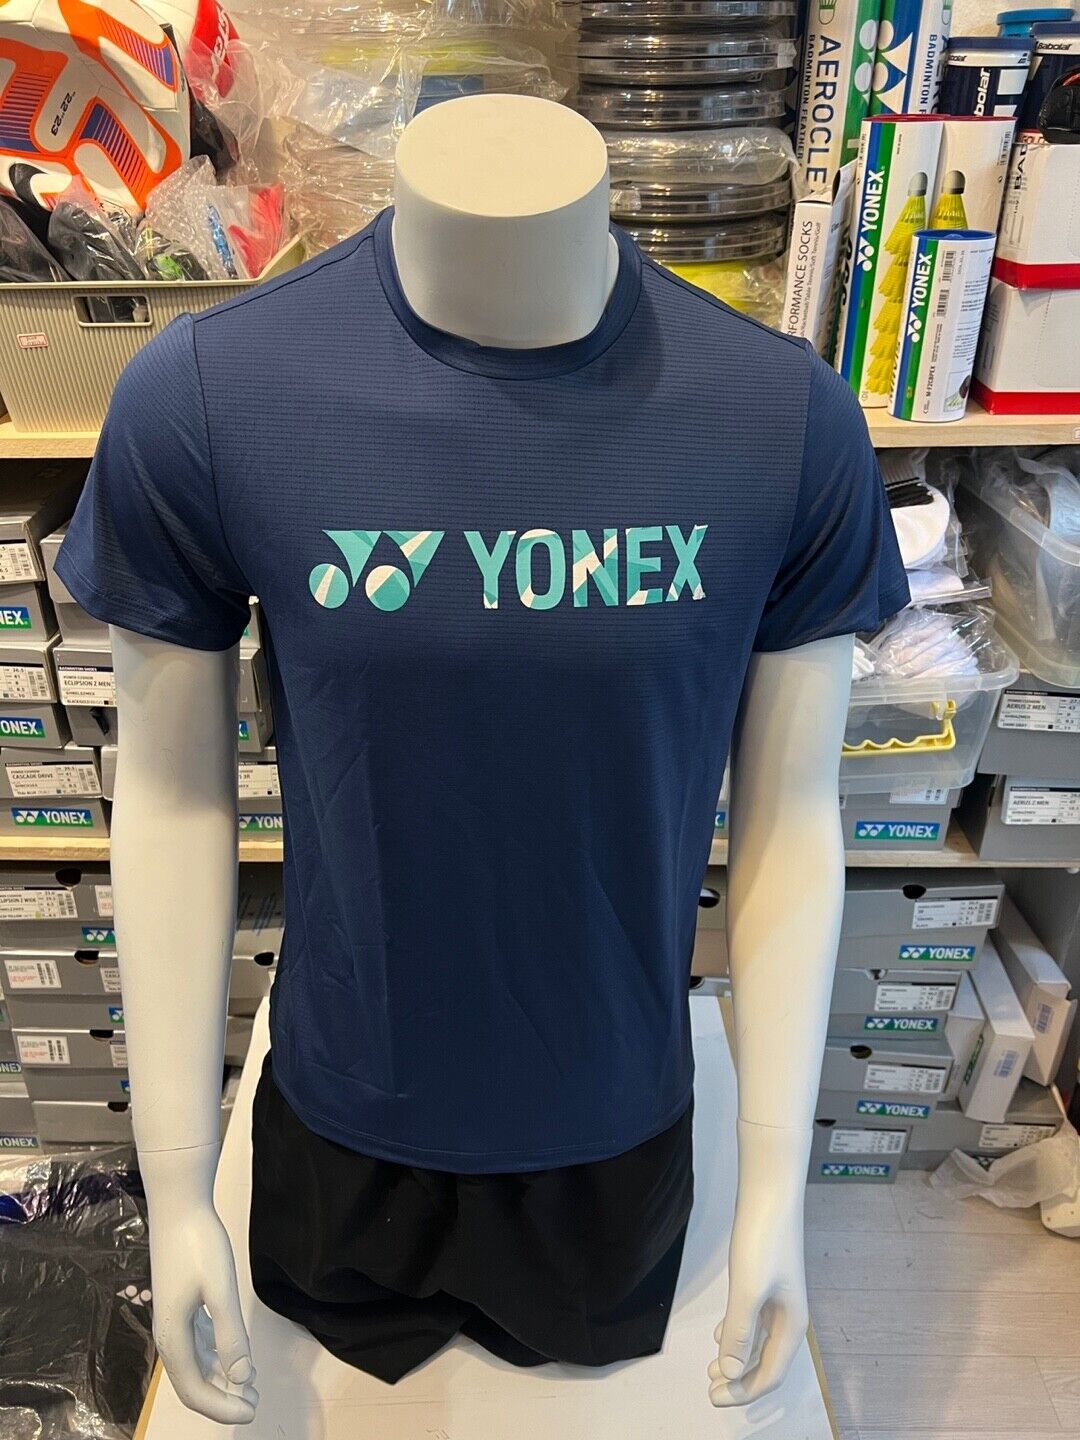 Primary image for YONEX Men's Badminton T-Shirts Sports Top Apparel Blue [95/US:XS] NWT 99TR001M